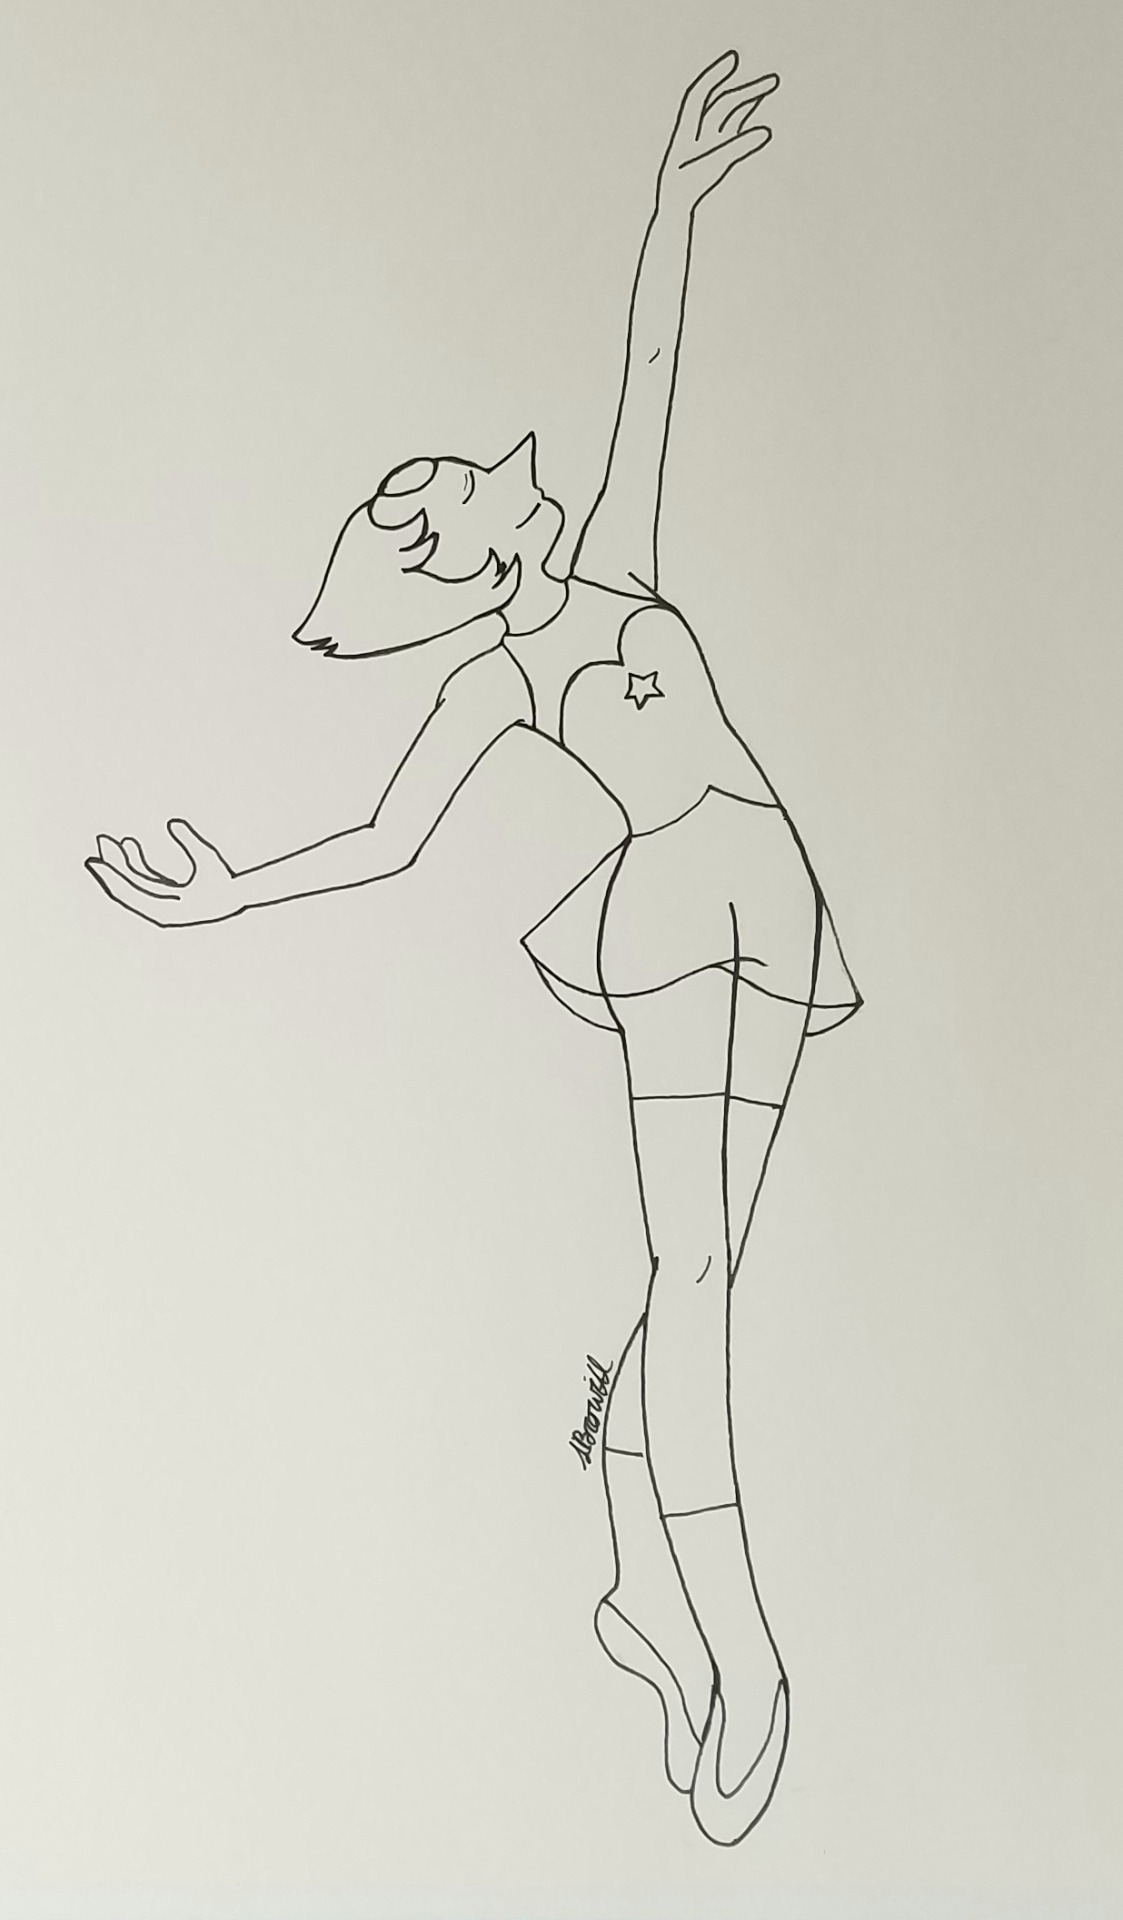 Day 17’s prompt was “graceful”, so who better to draw than everyone’s favorite bird mom? (On a side note, I used a picture of a real ballerina for reference, and holy cow ballet is impressive!)